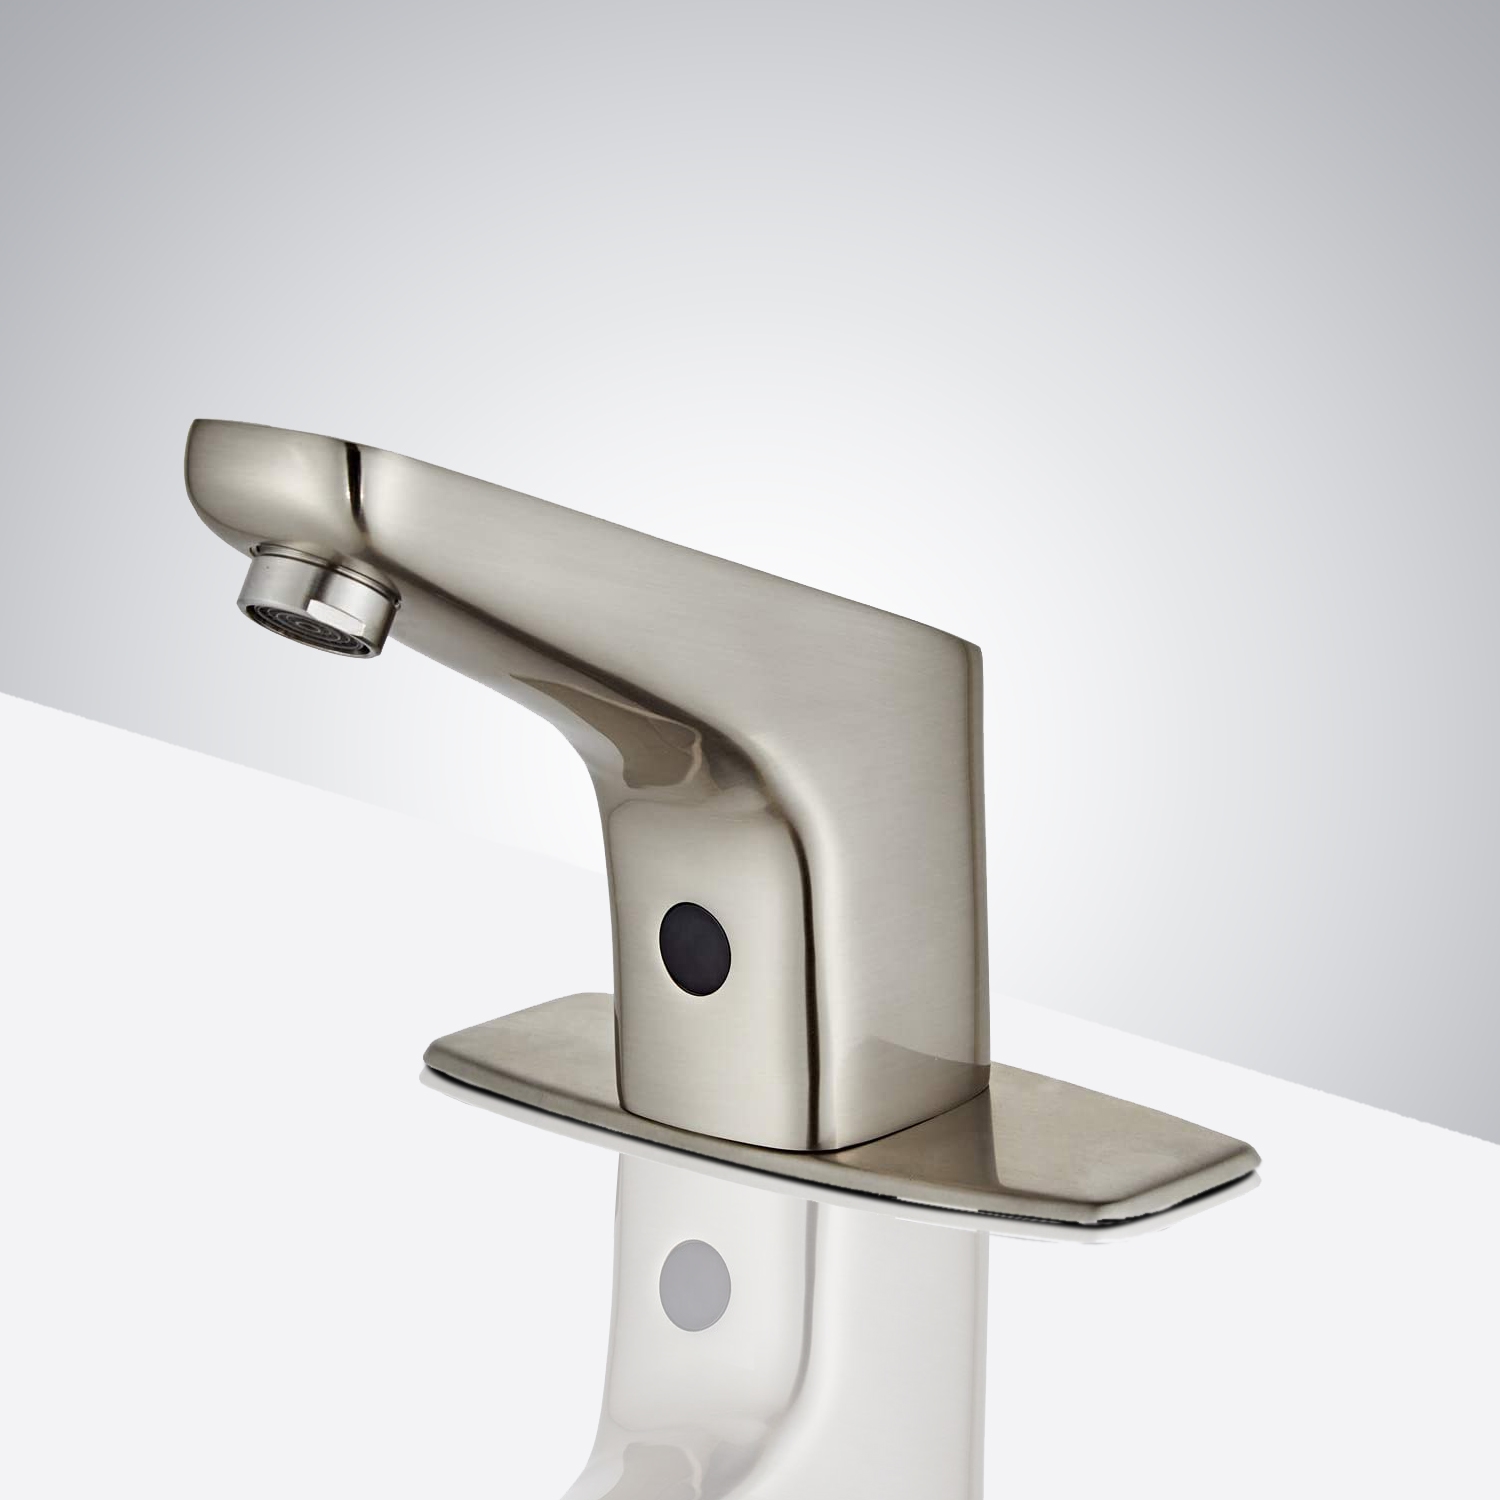 Fontana Sierra Commercial High Quality Brushed Nickel Touchless Automatic Sensor Sink Faucet